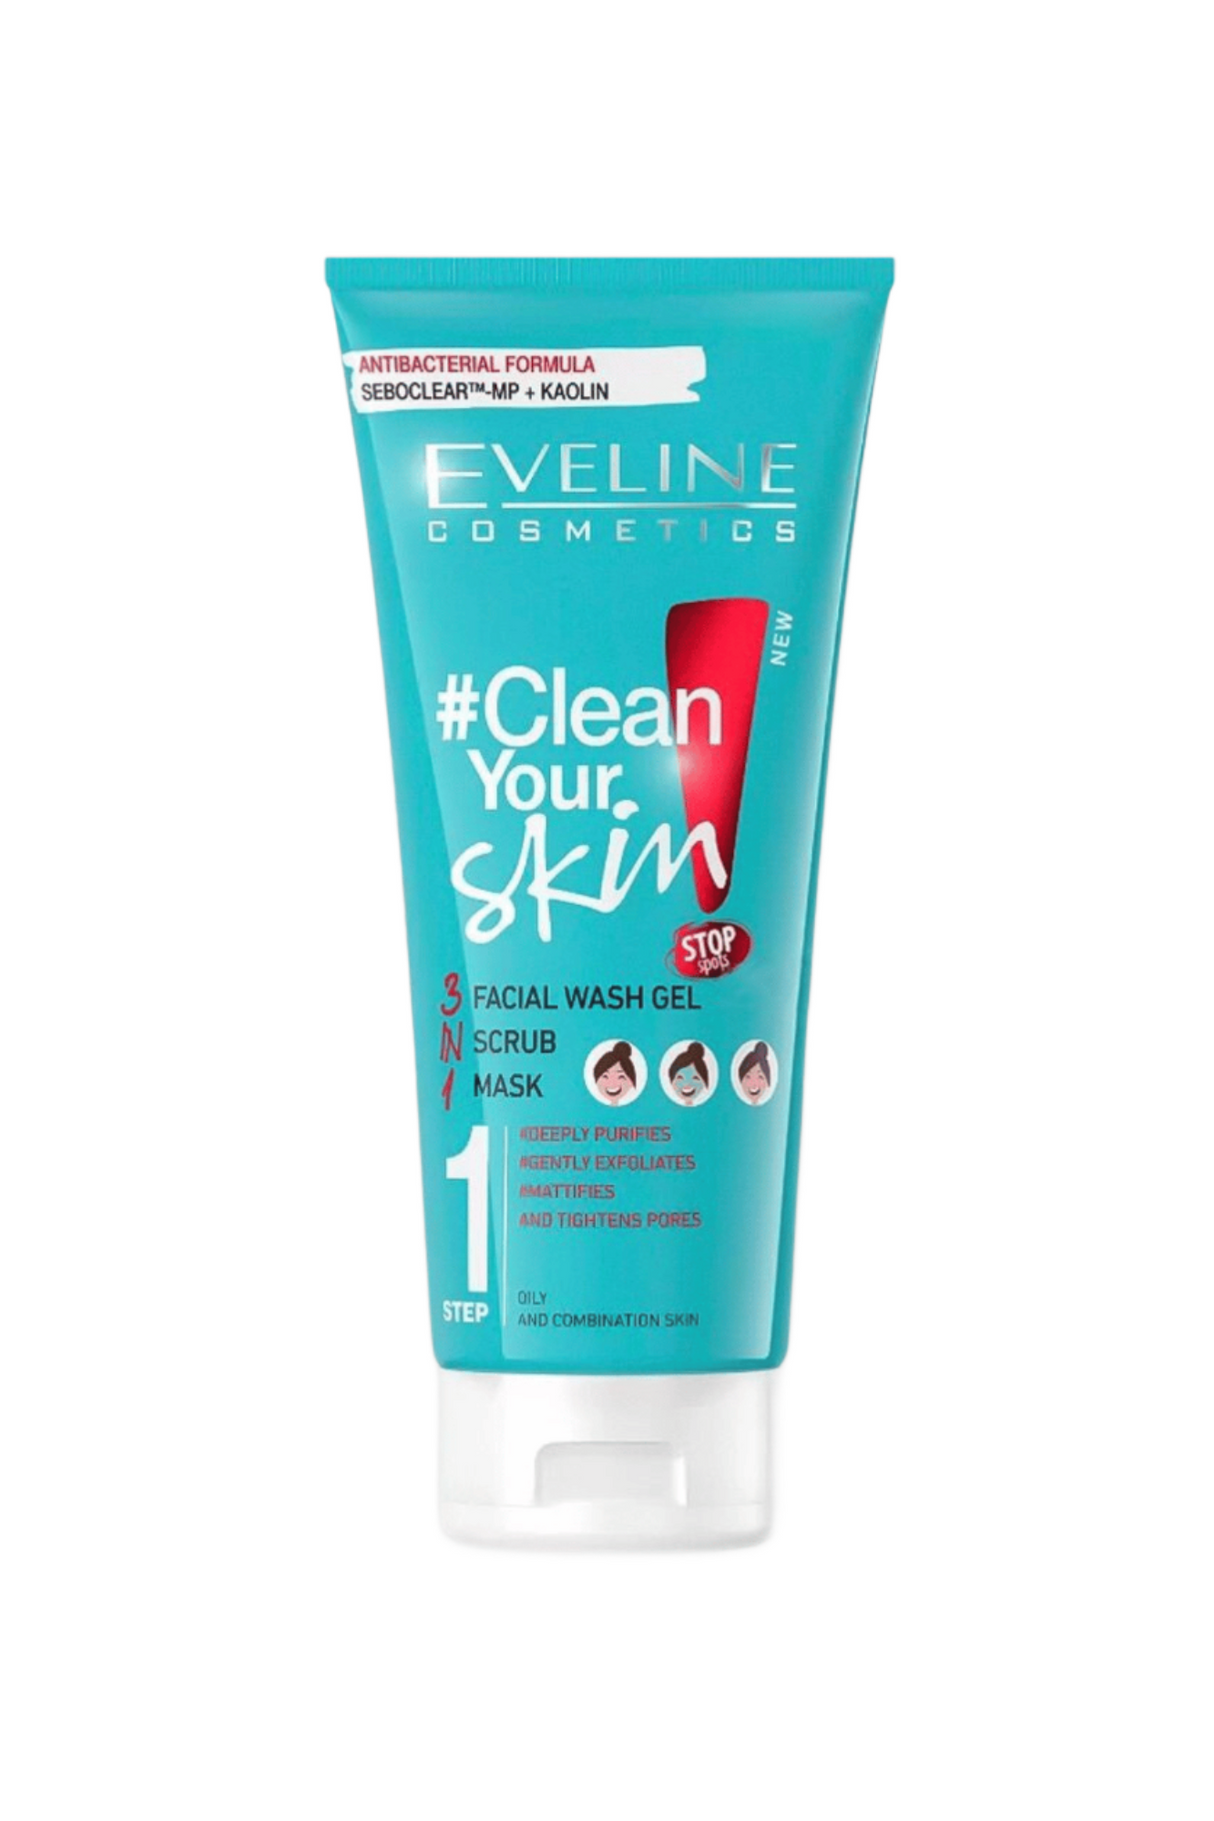 eveline face wash clean your skin 3in1 200ml